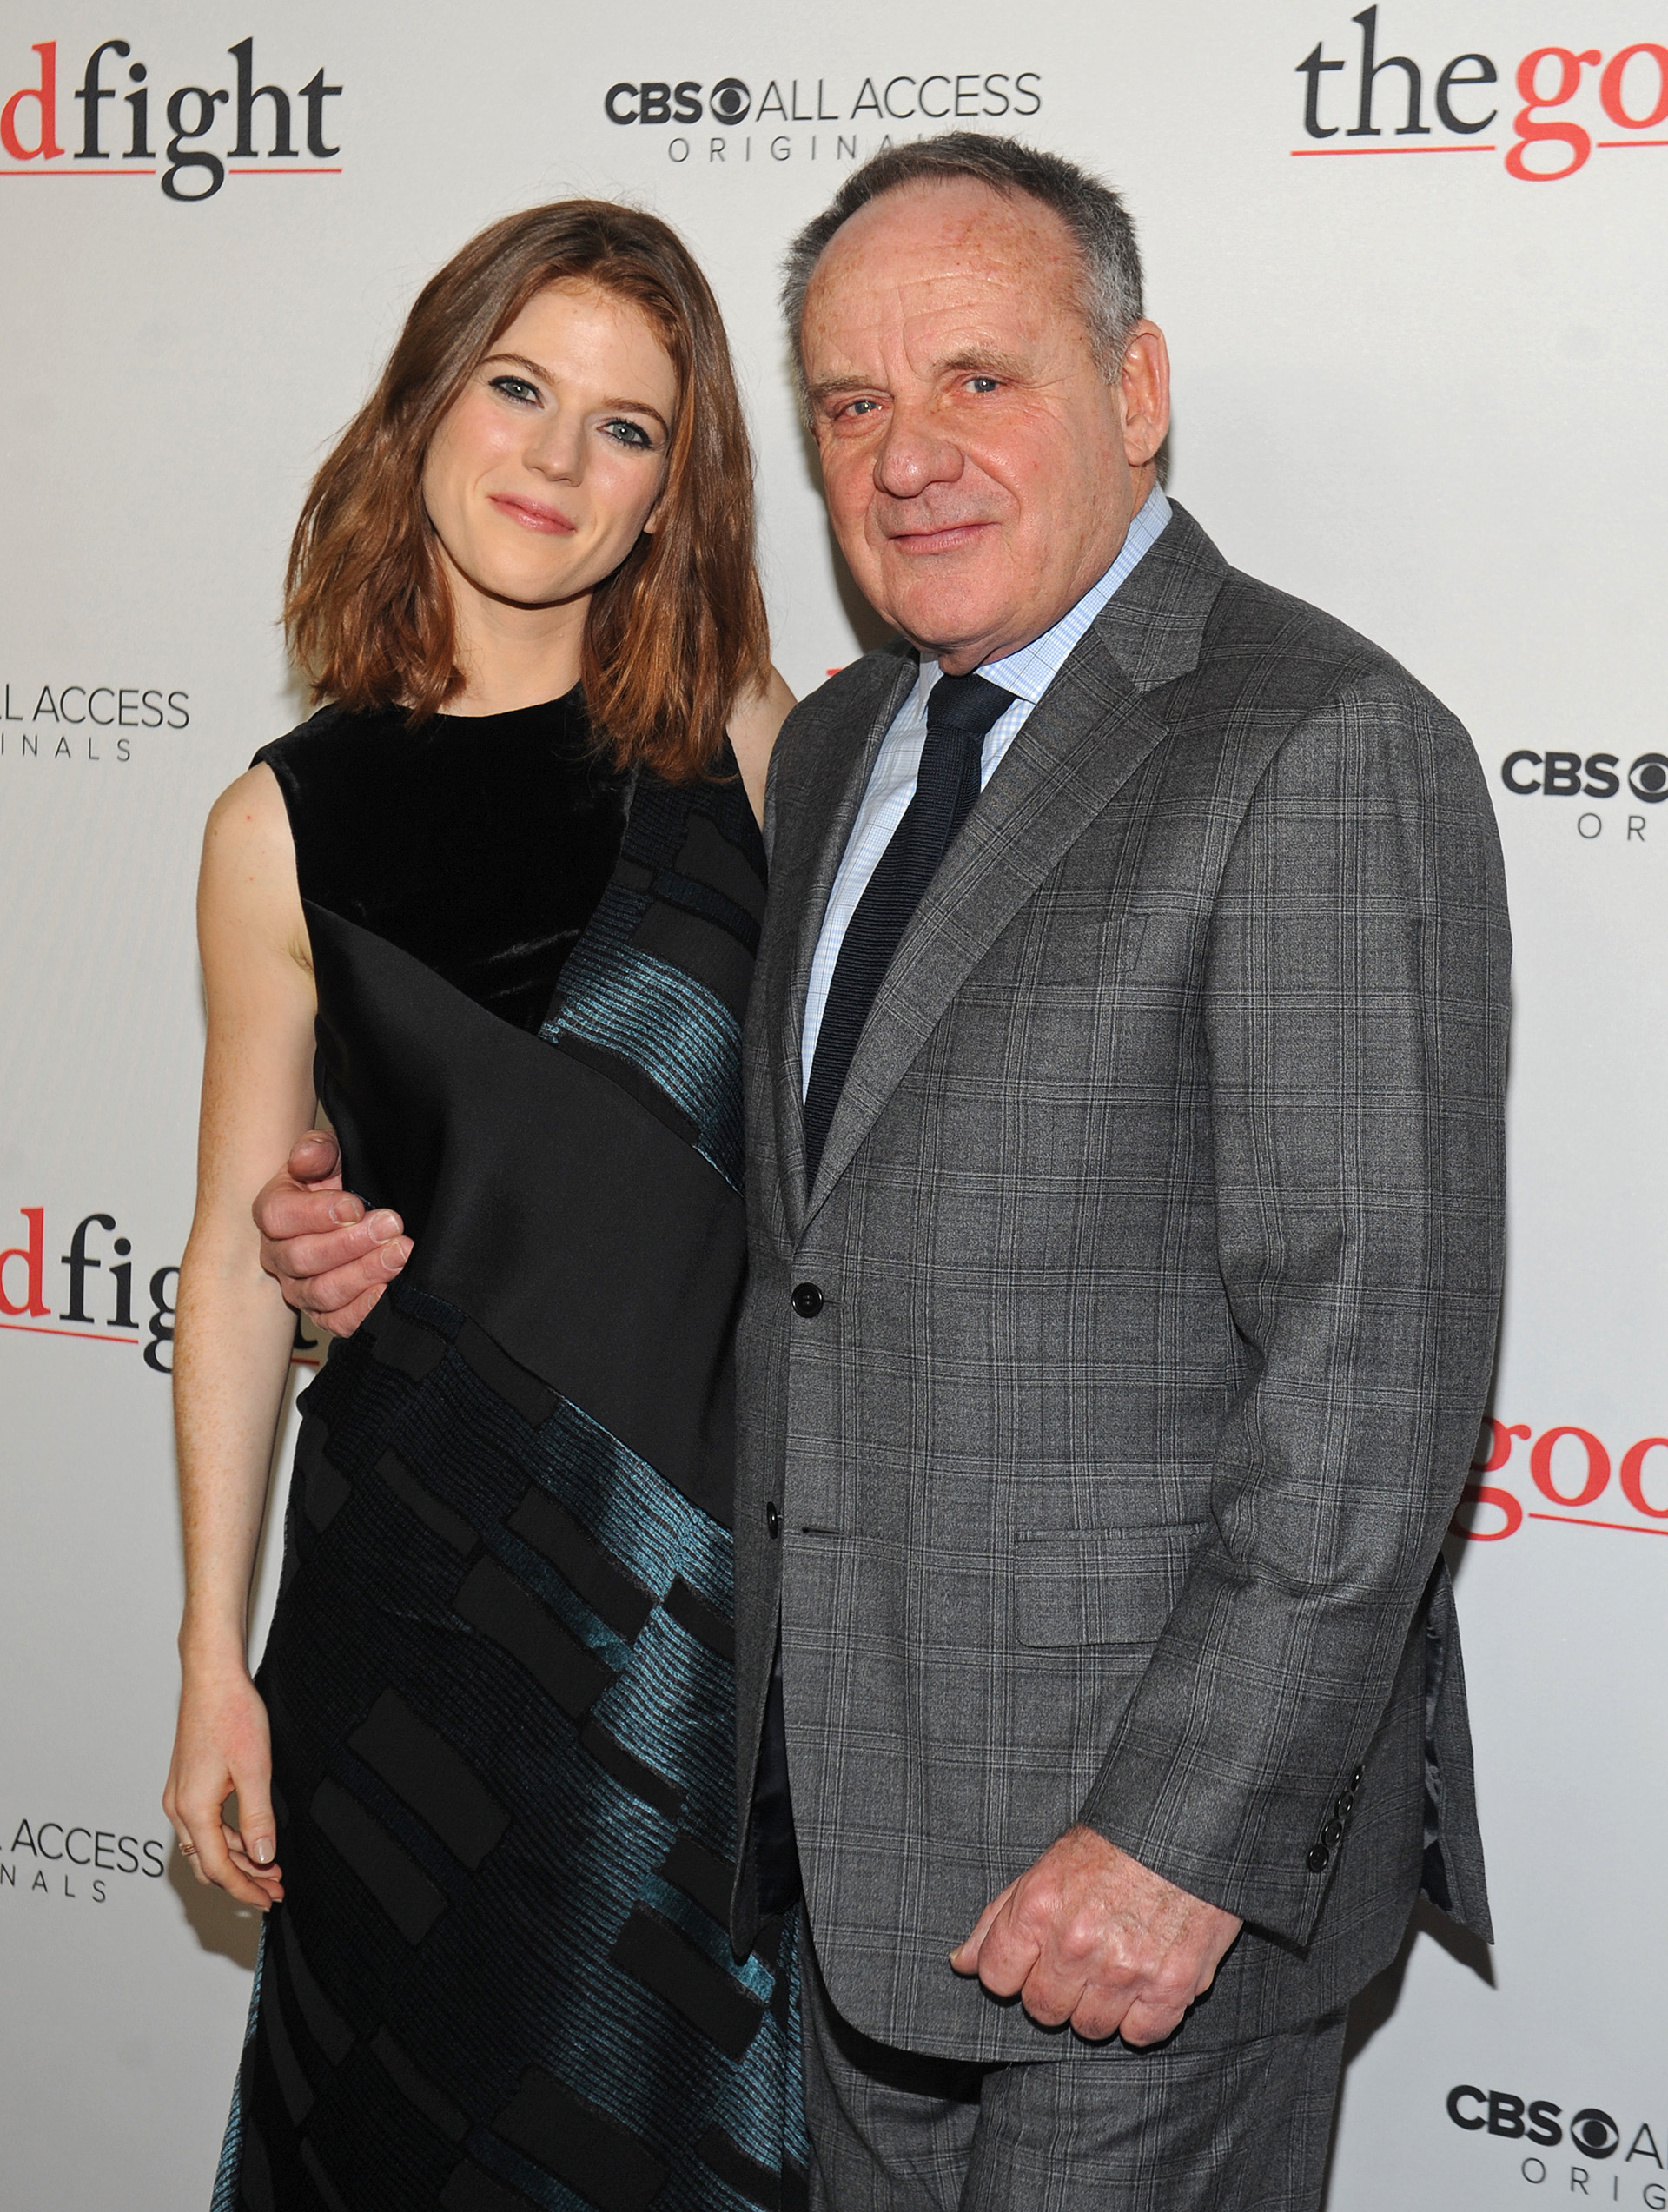 Rose Leslie and her on-screen father, Paul Guilfoyle, pose together before the premiere.